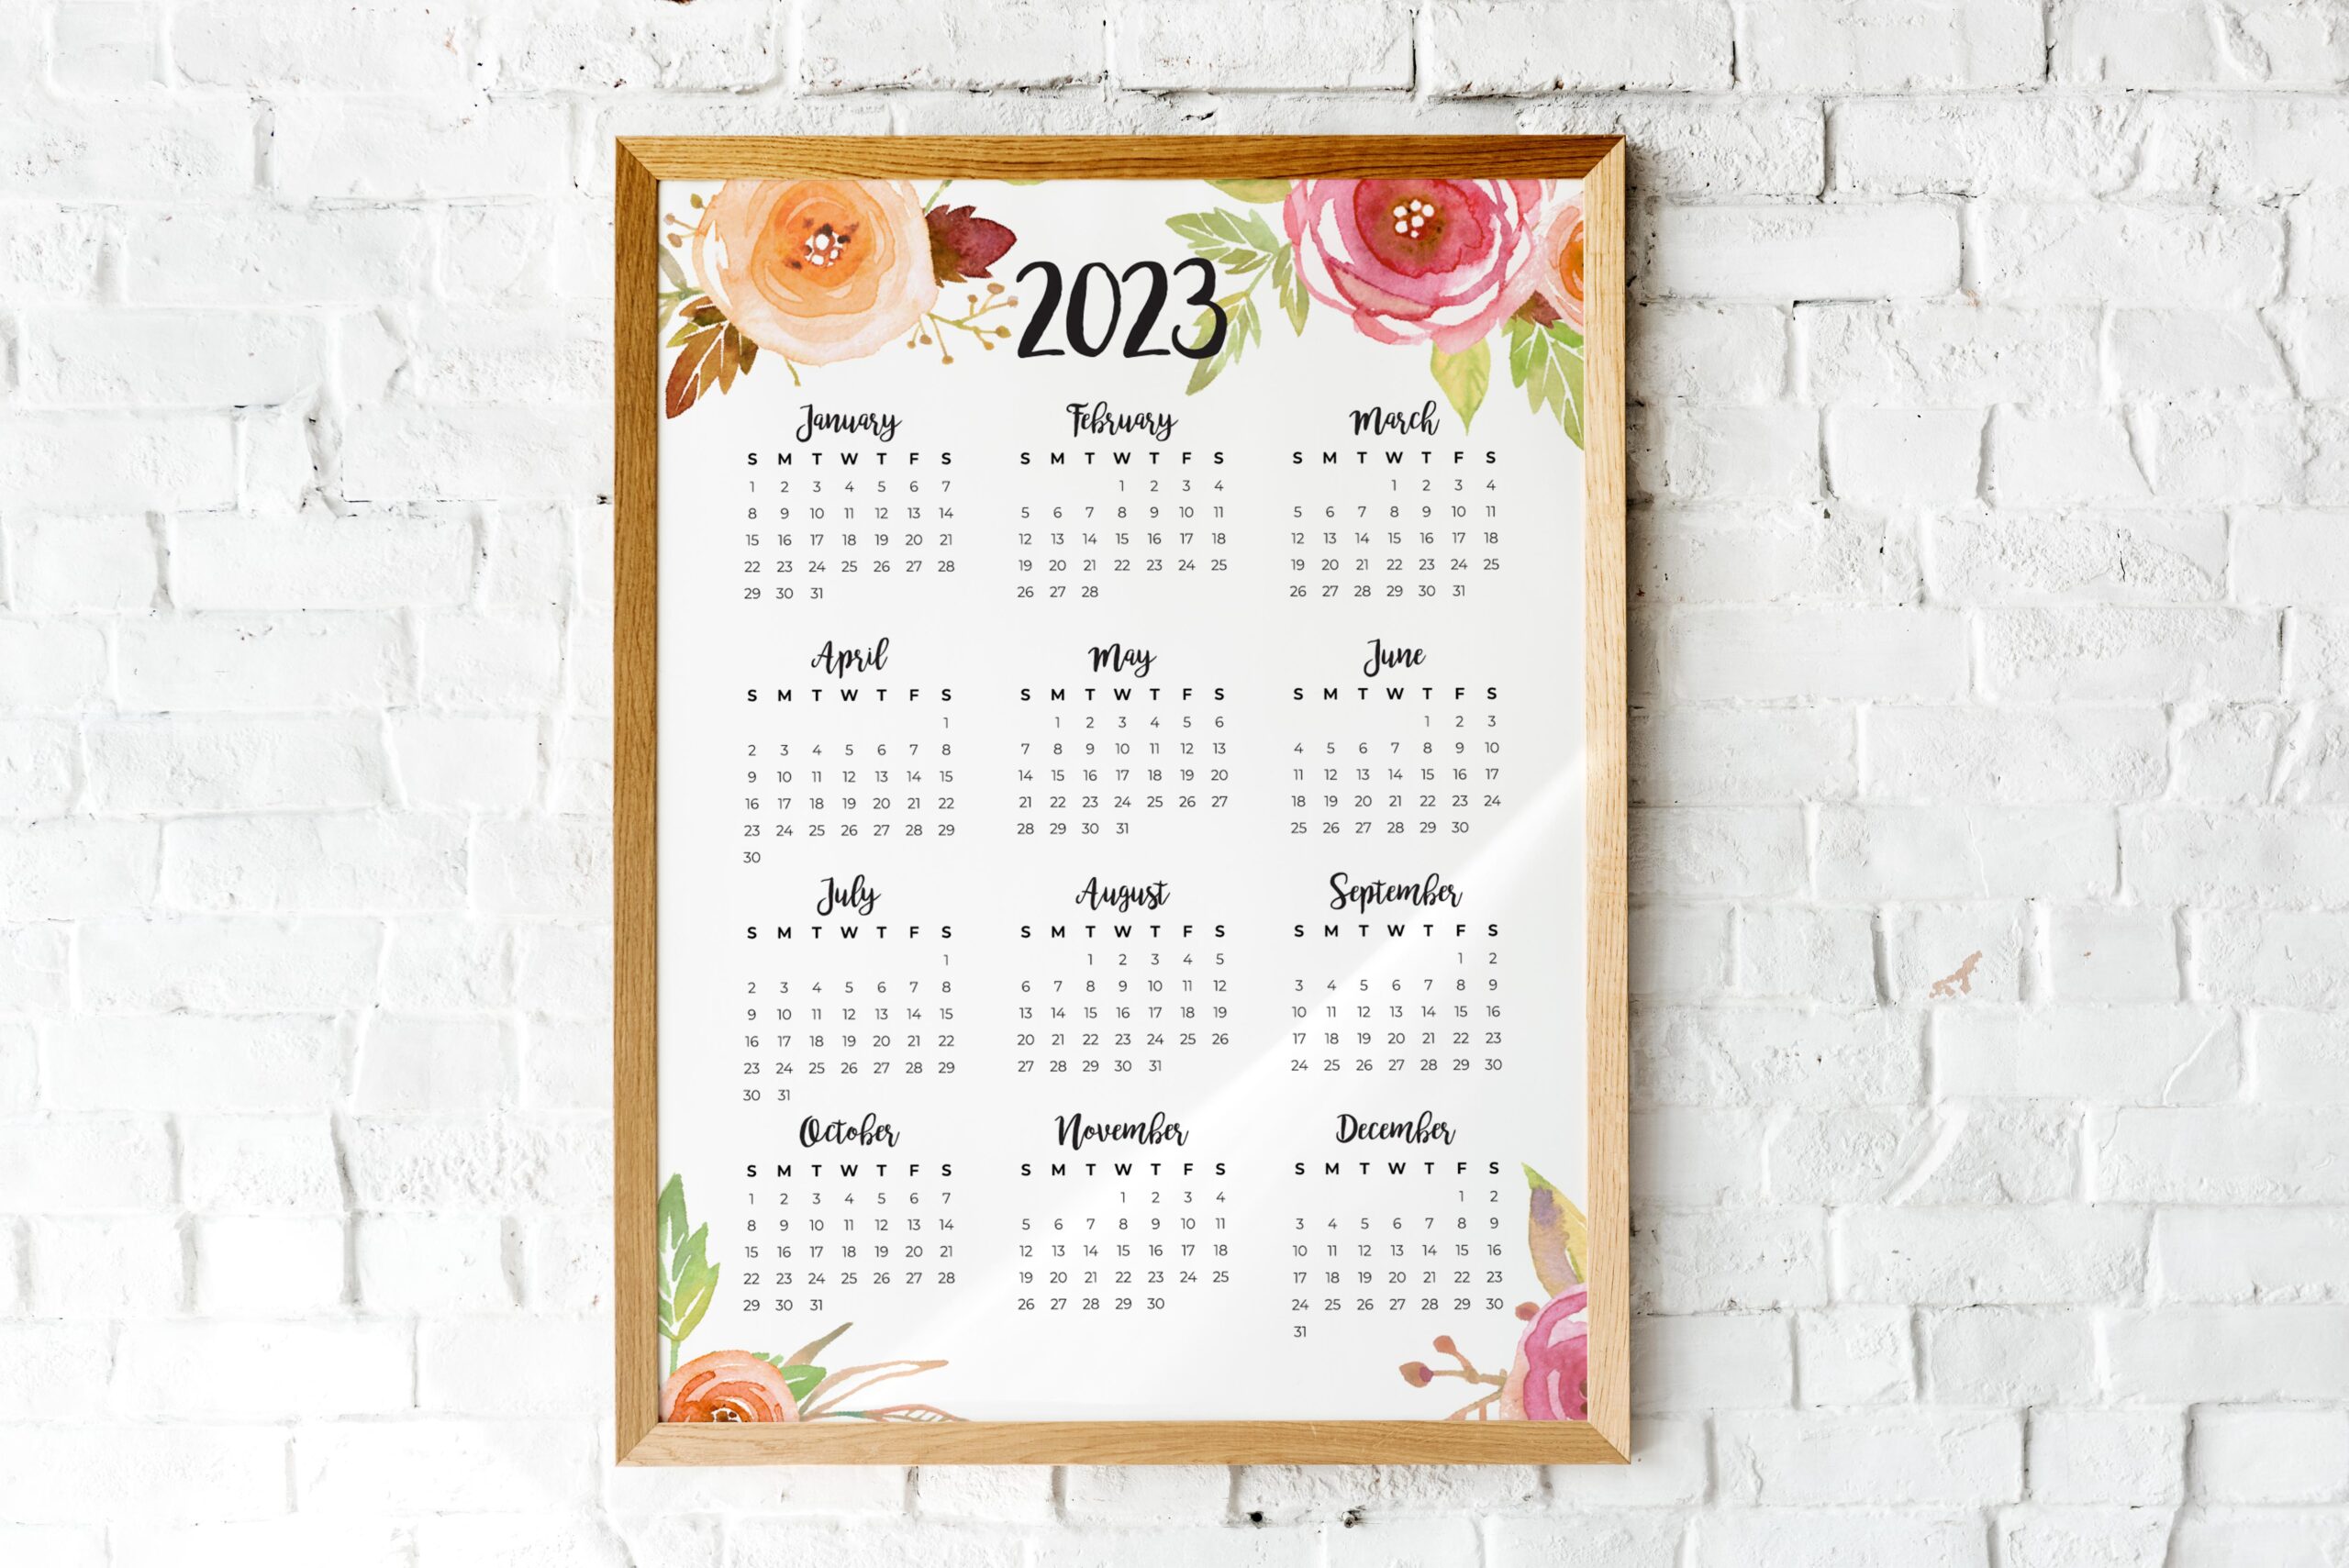 2023-year-calendar-yearly-printable-yearly-calendar-2023-free-download-and-print-galaxypw